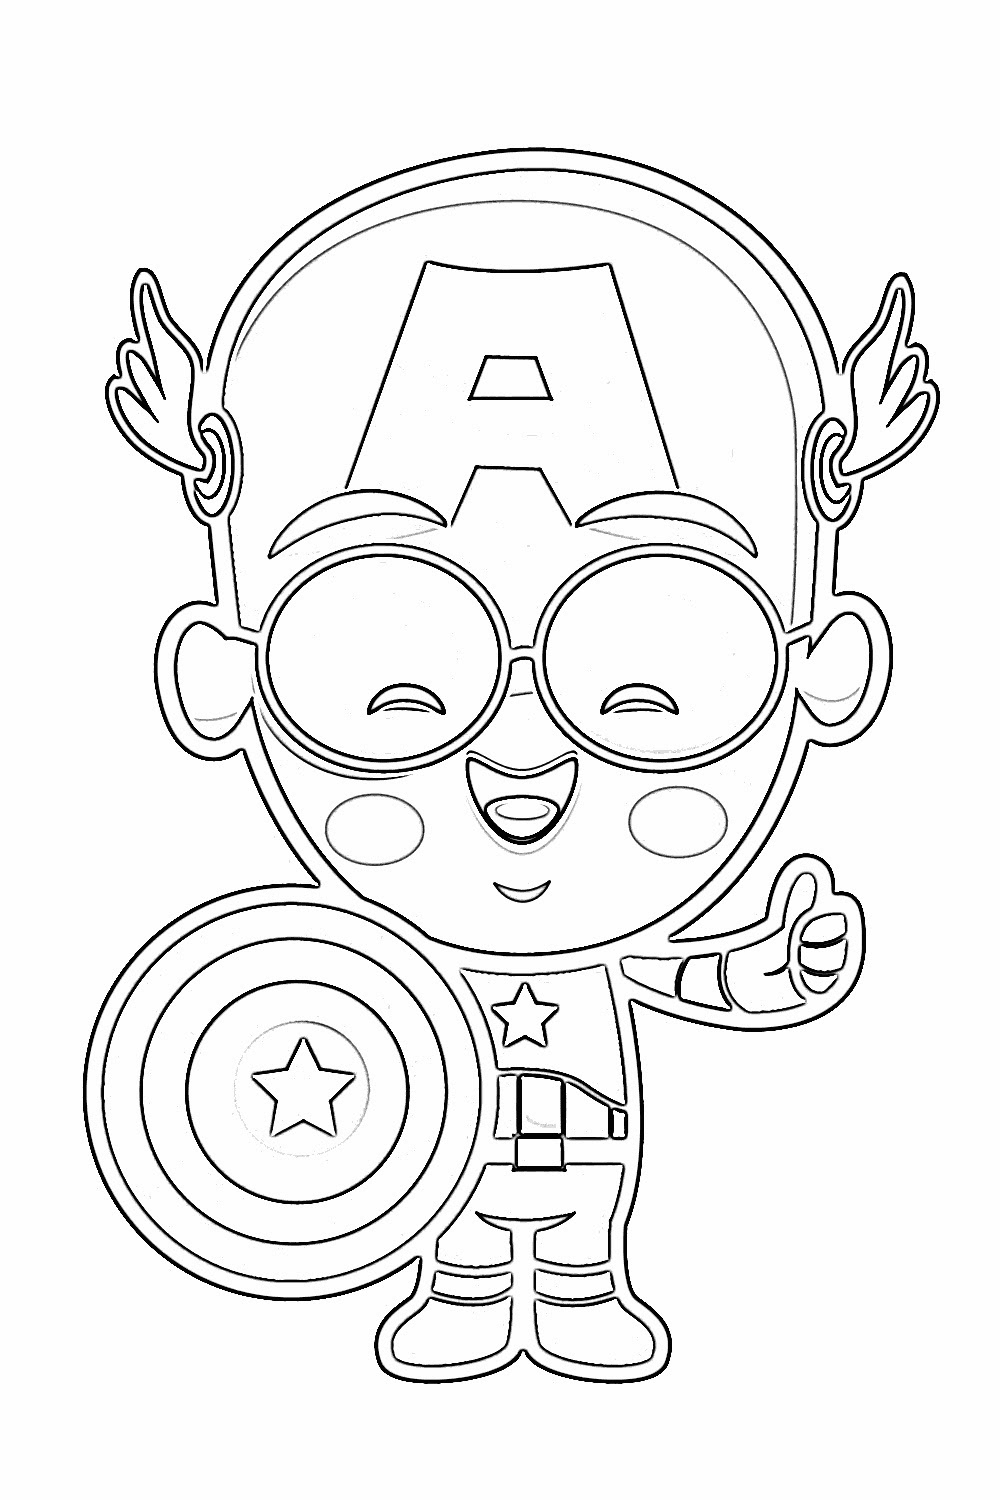 Cute Captain Wearing Glasses Coloring Page Free Printable Coloring Pages For Kids